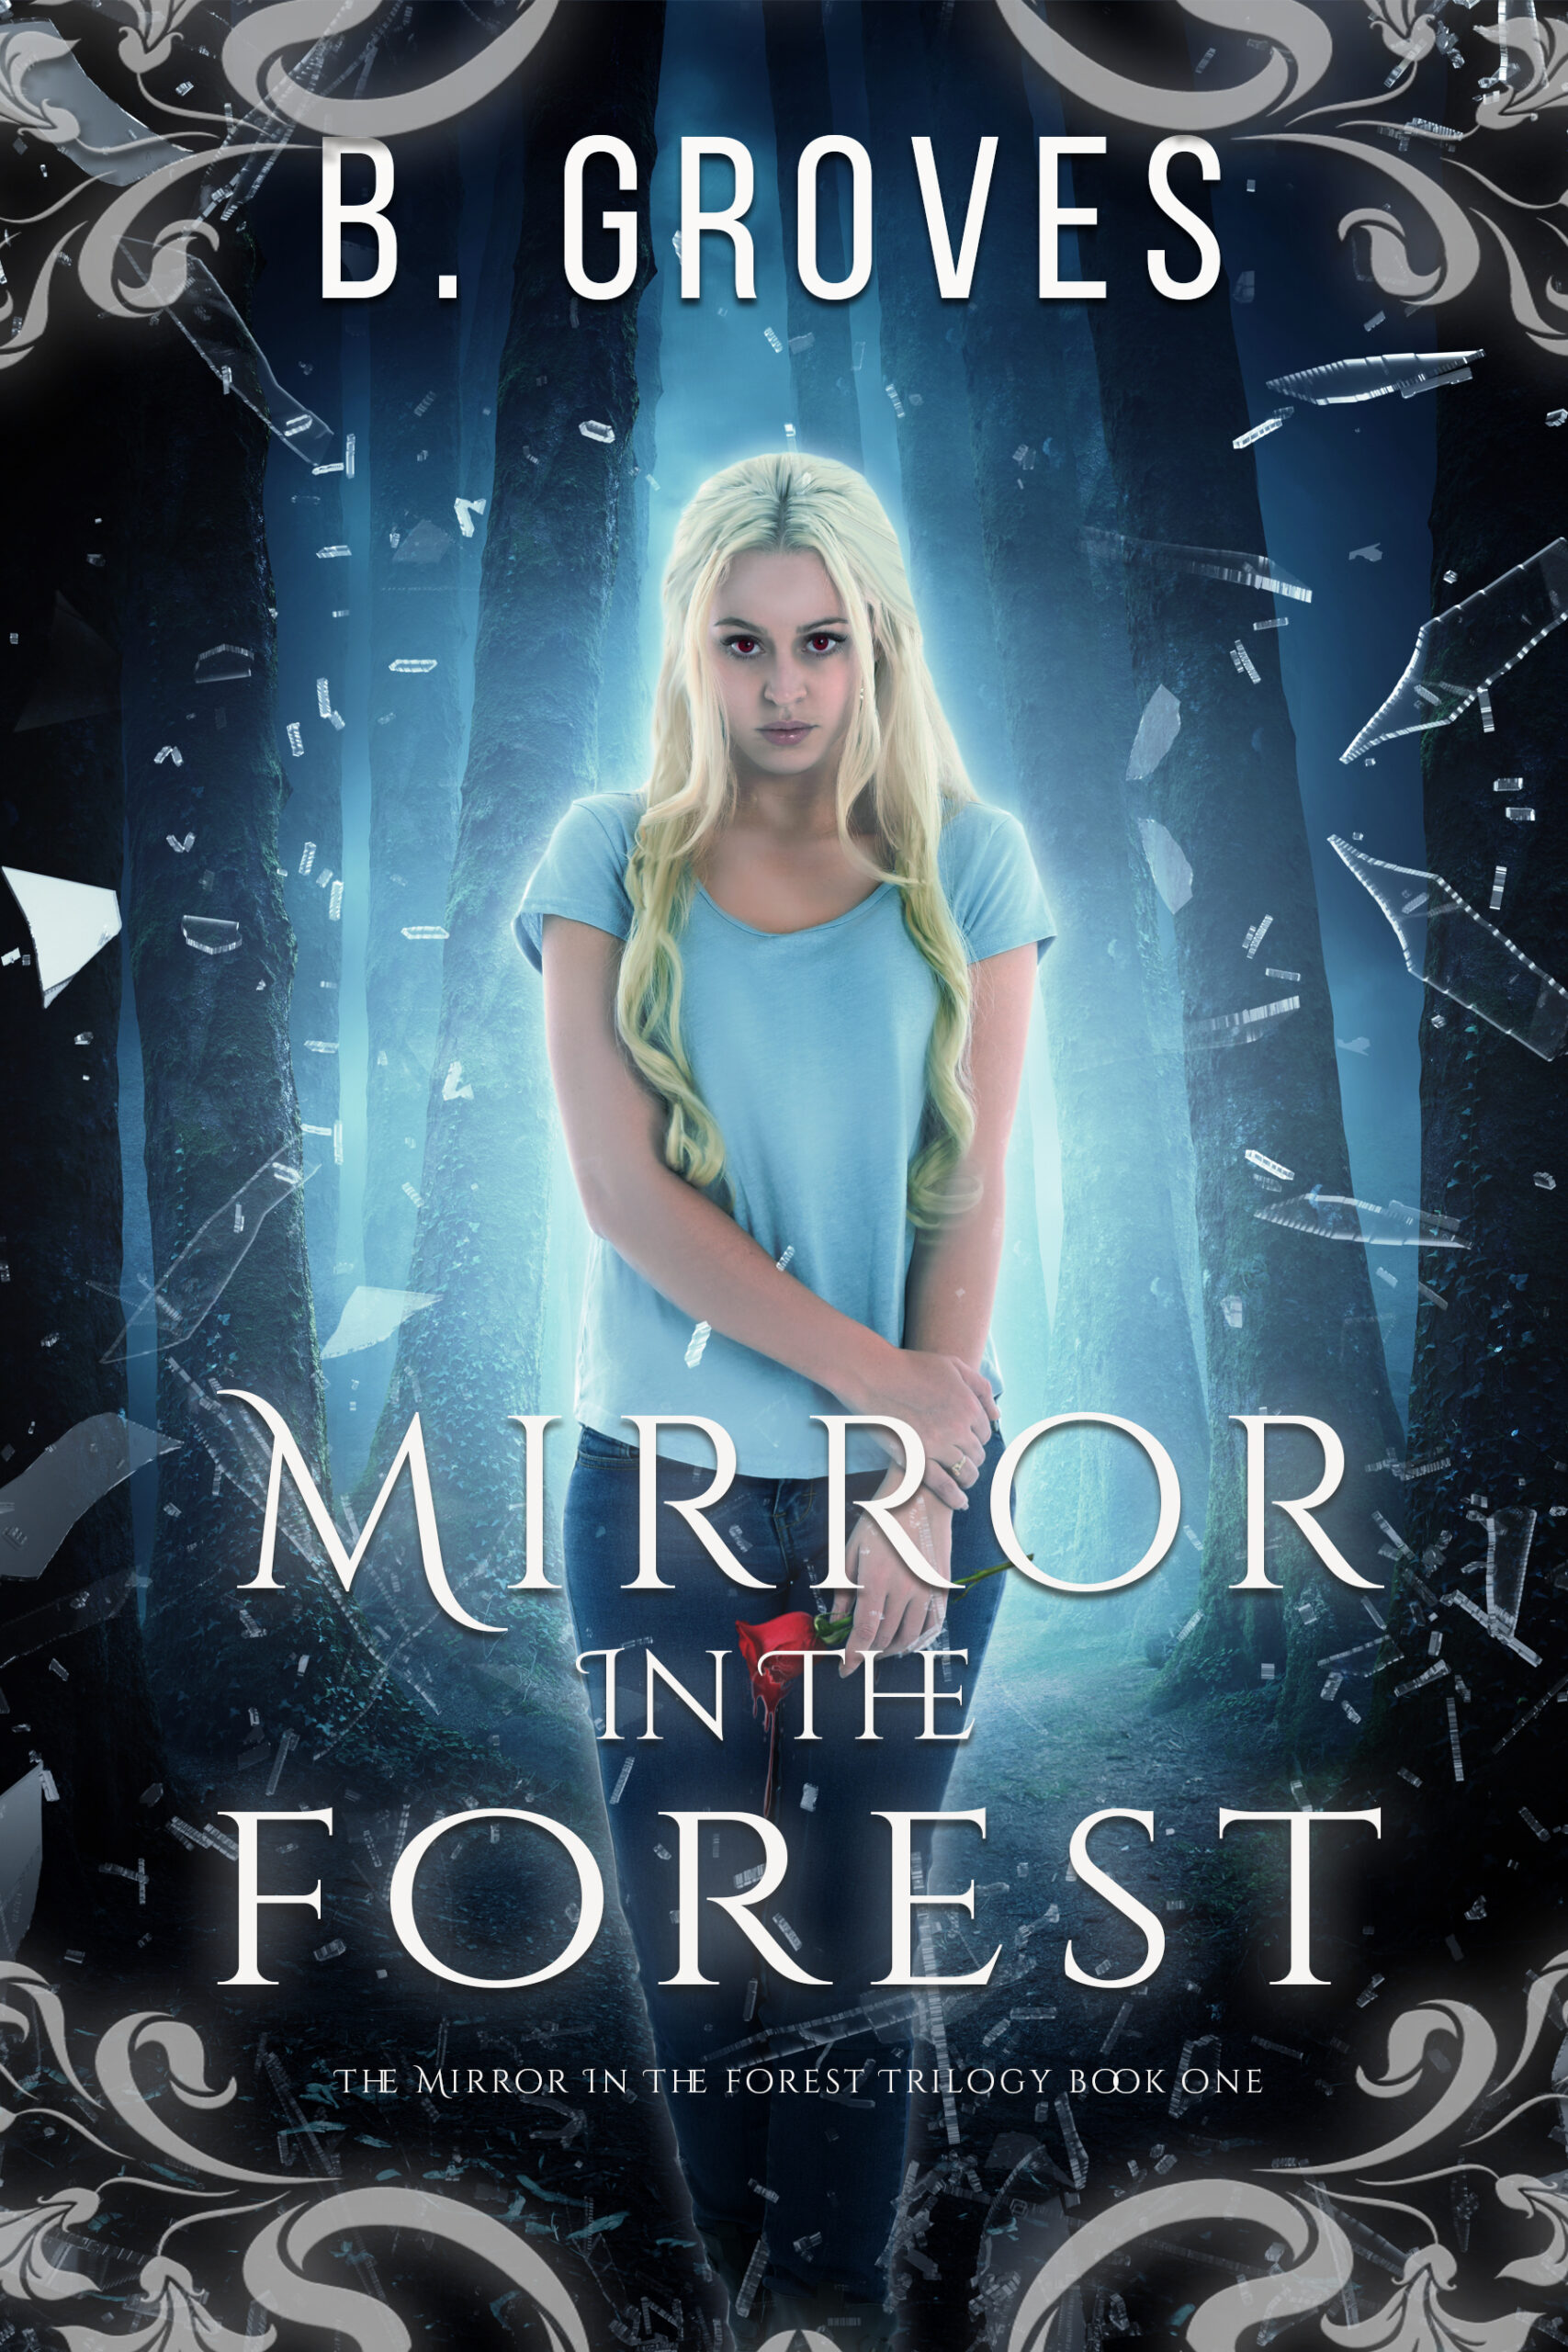 The Mirror in the Forest Trilogy